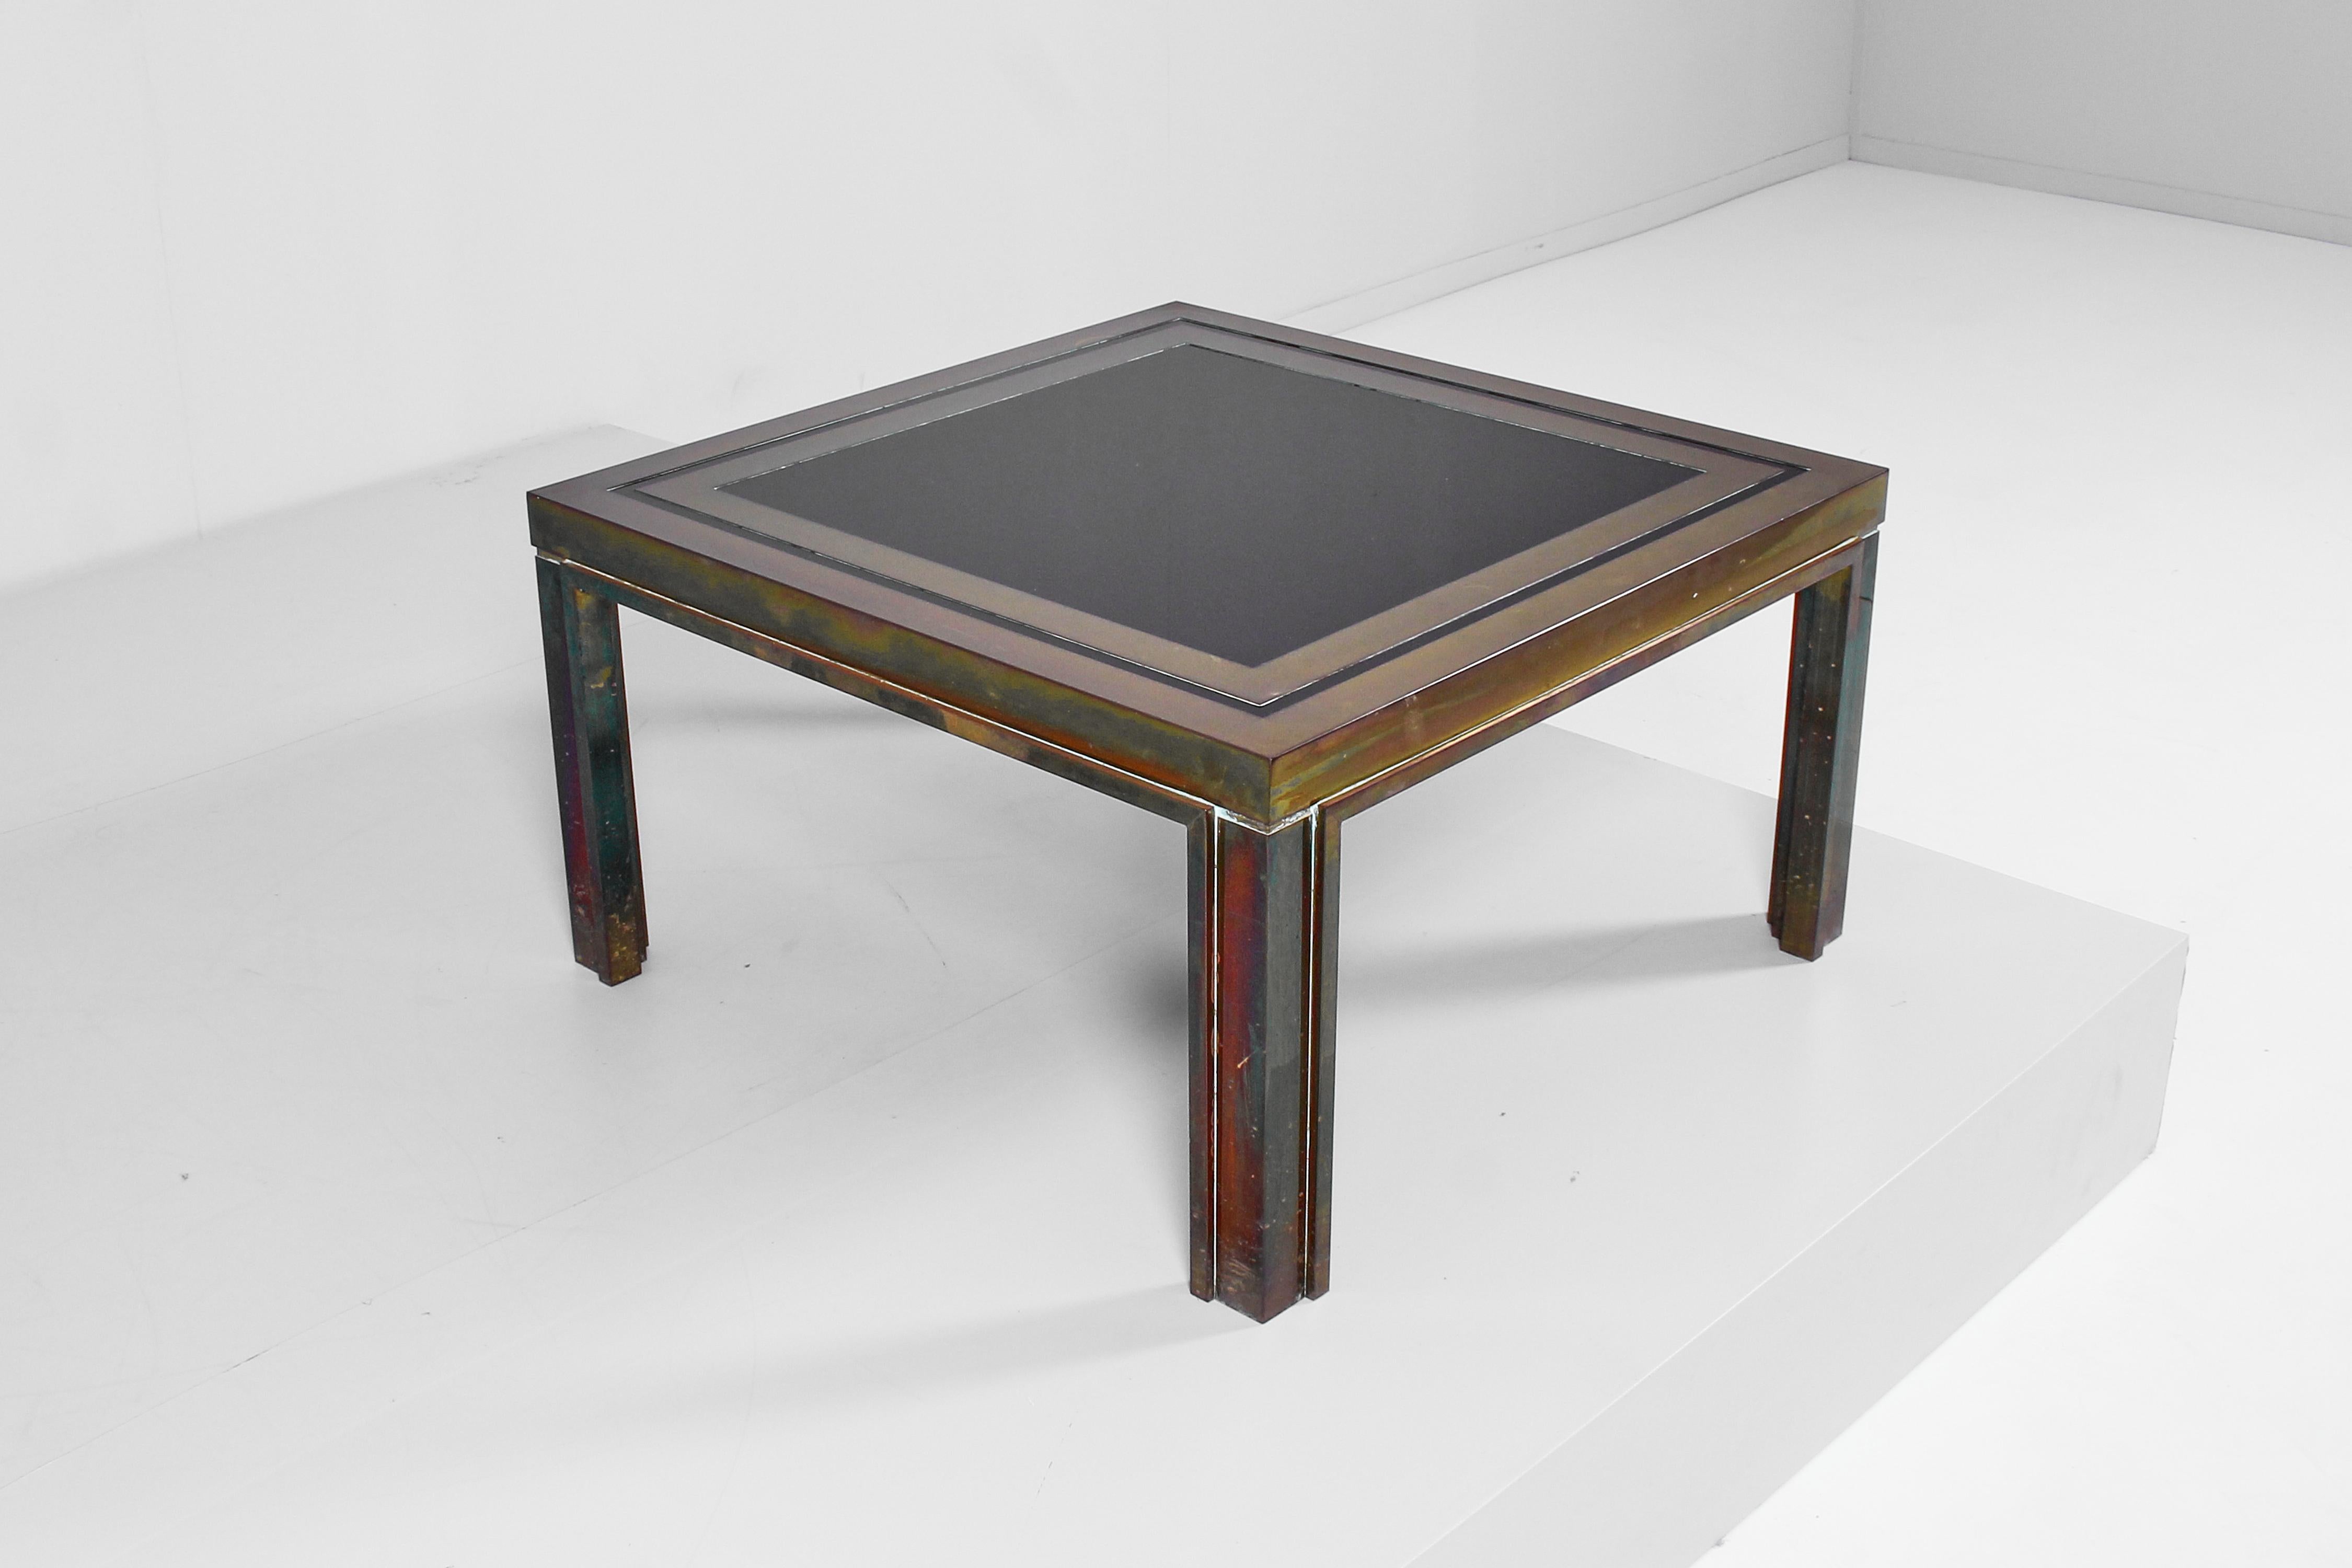 Midcentury Maison Jansen Brass and Dark Glass Coffee Table 70s, France In Good Condition For Sale In Palermo, IT